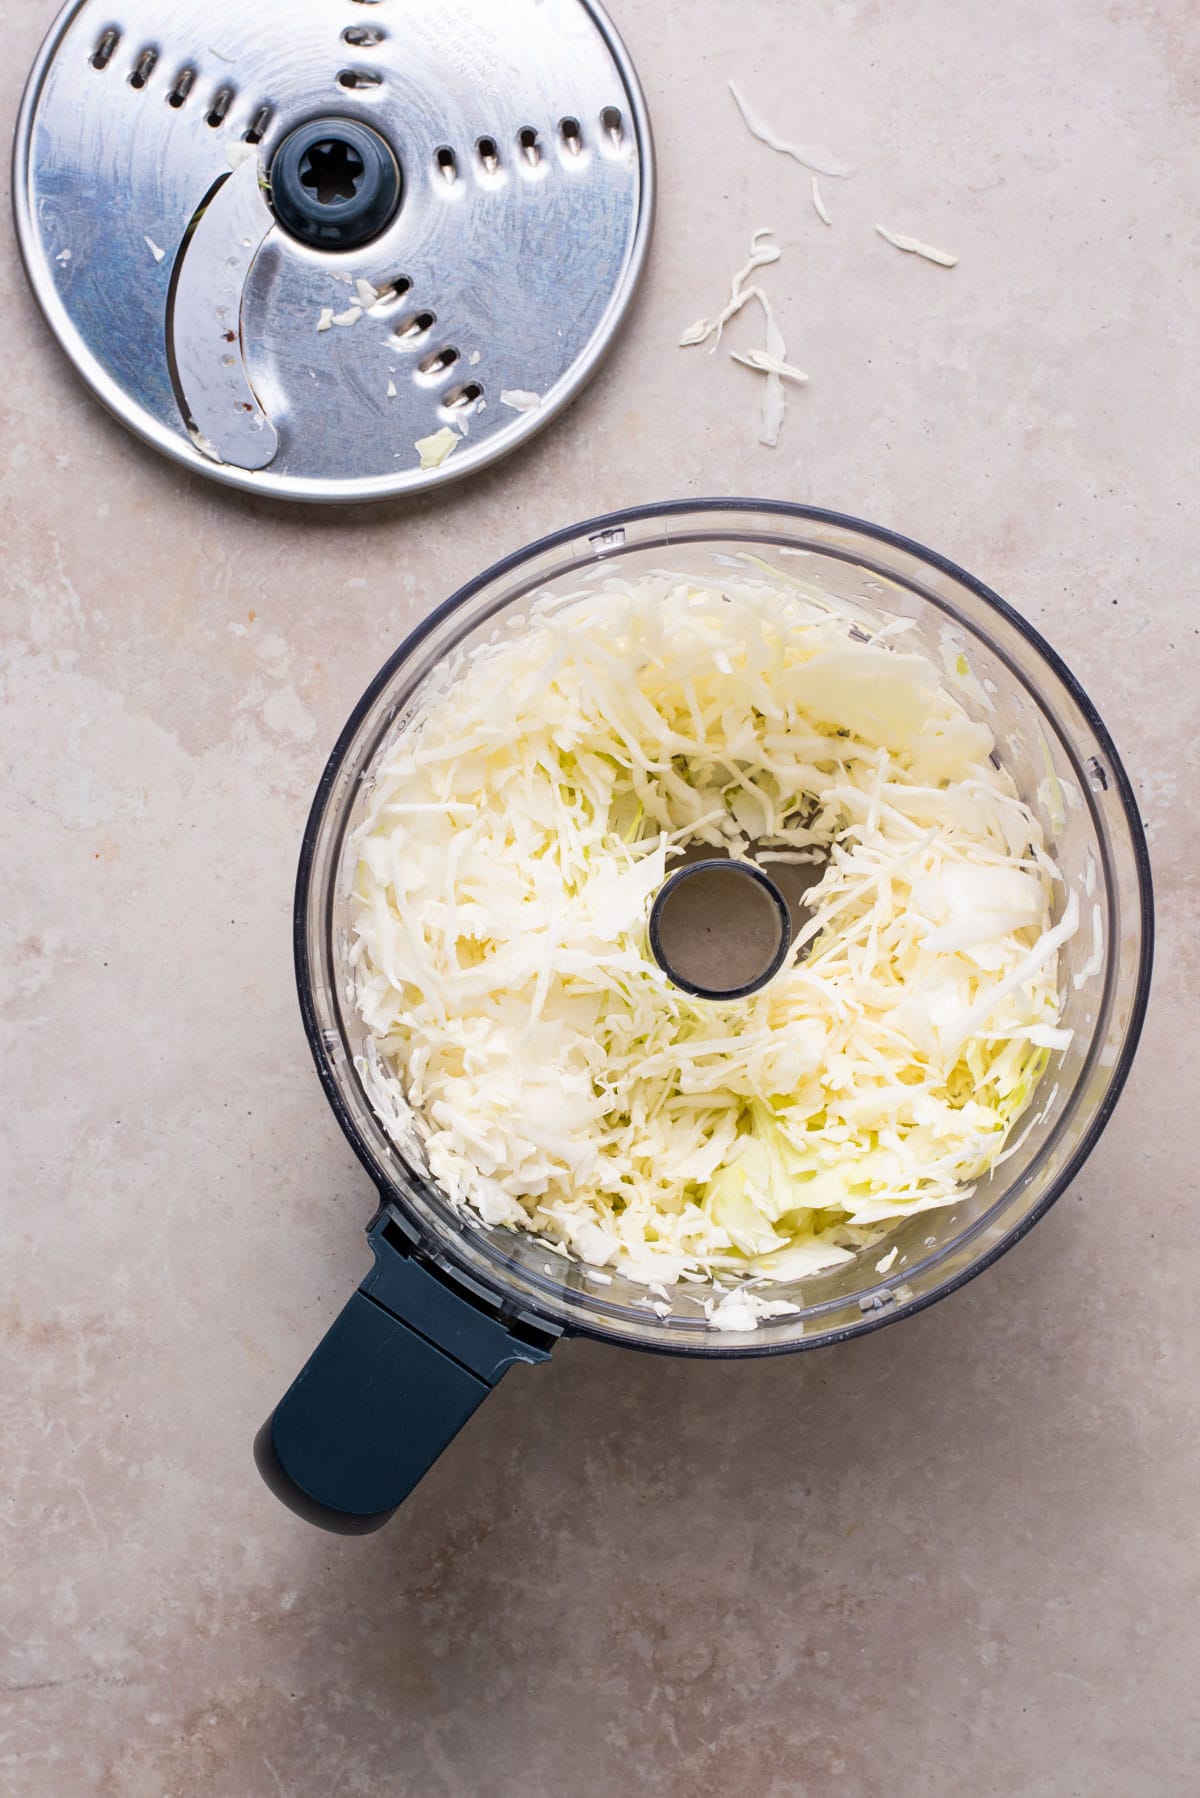 Shredded cabbage in a food processor.